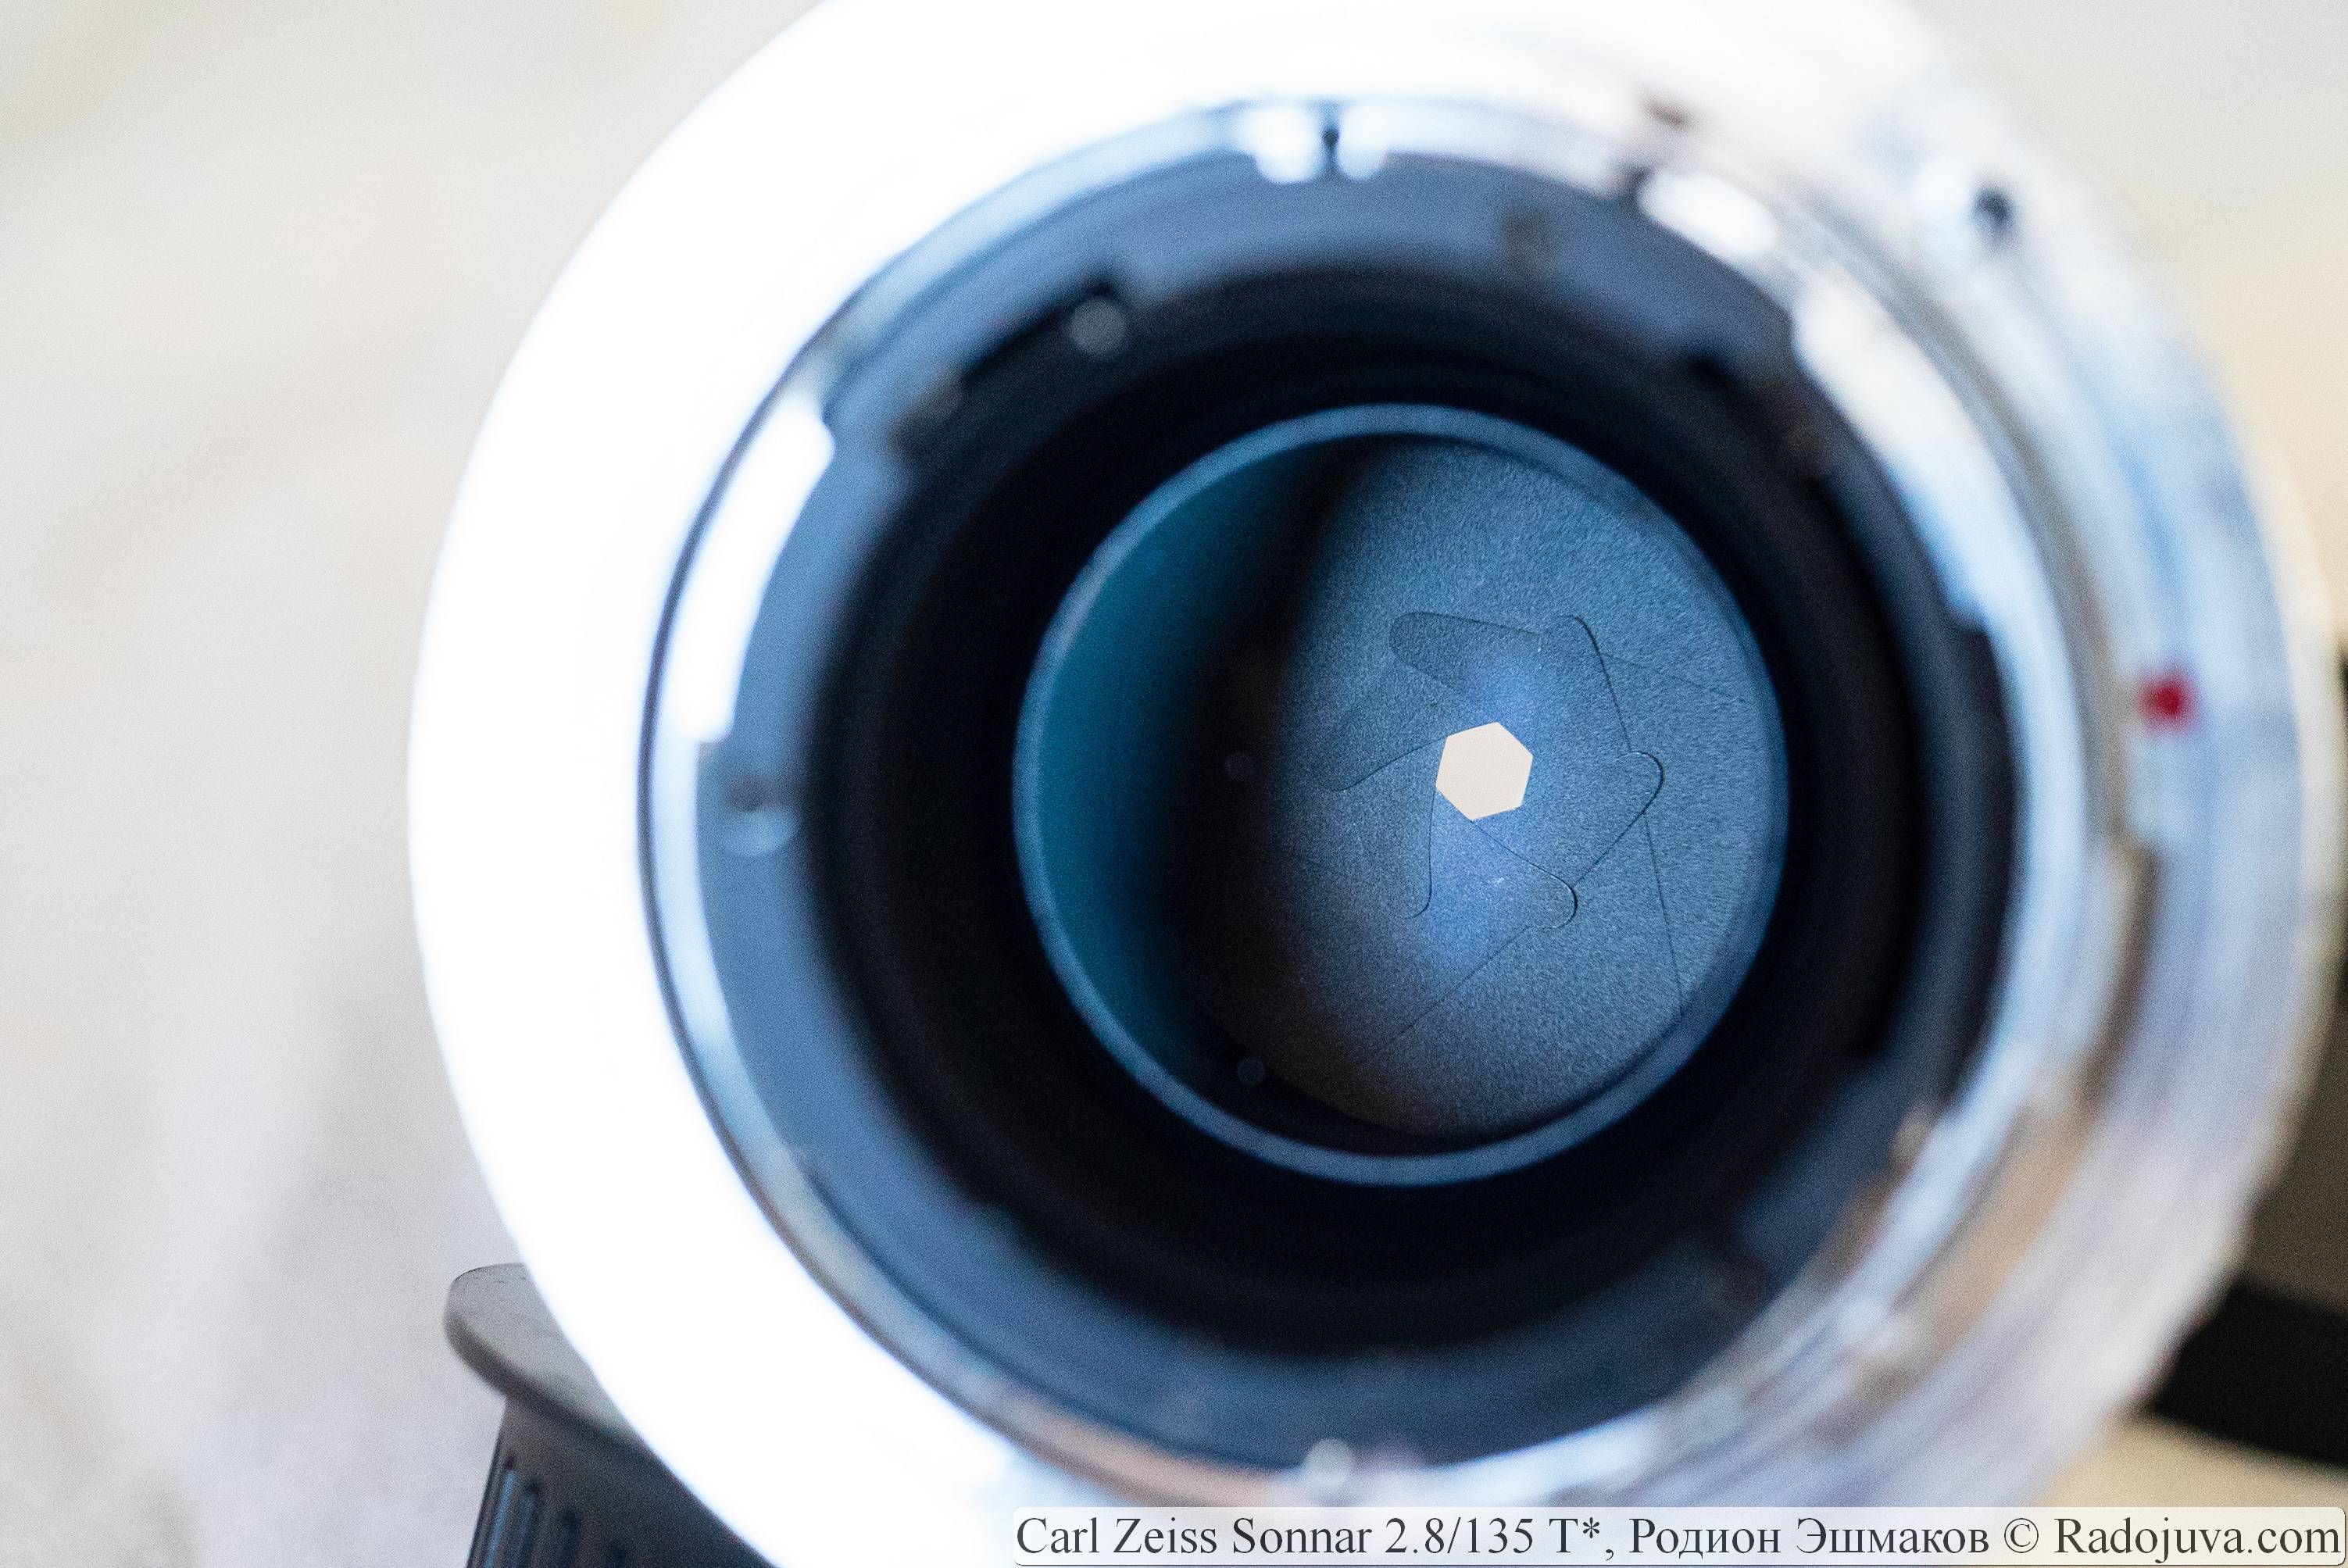 View of the closed aperture of the lens from the side of the rear lens.